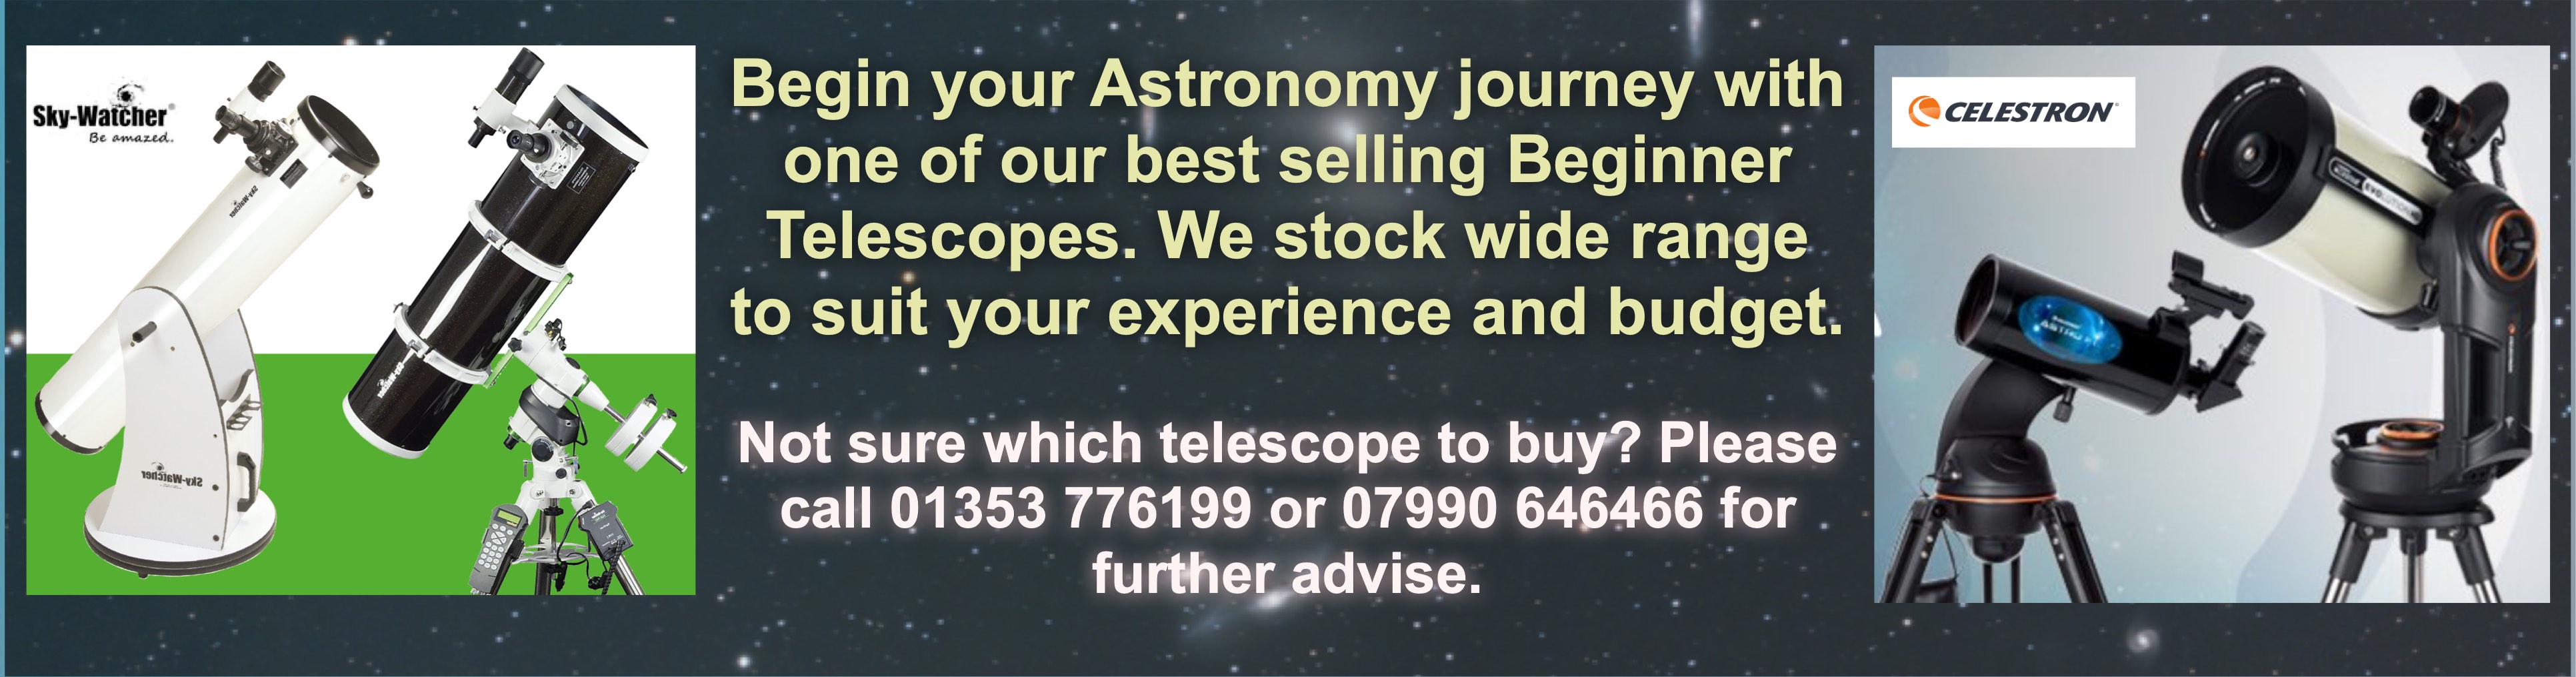 Best Telescopes for Beginners: Begin Your Journey into the Cosmos